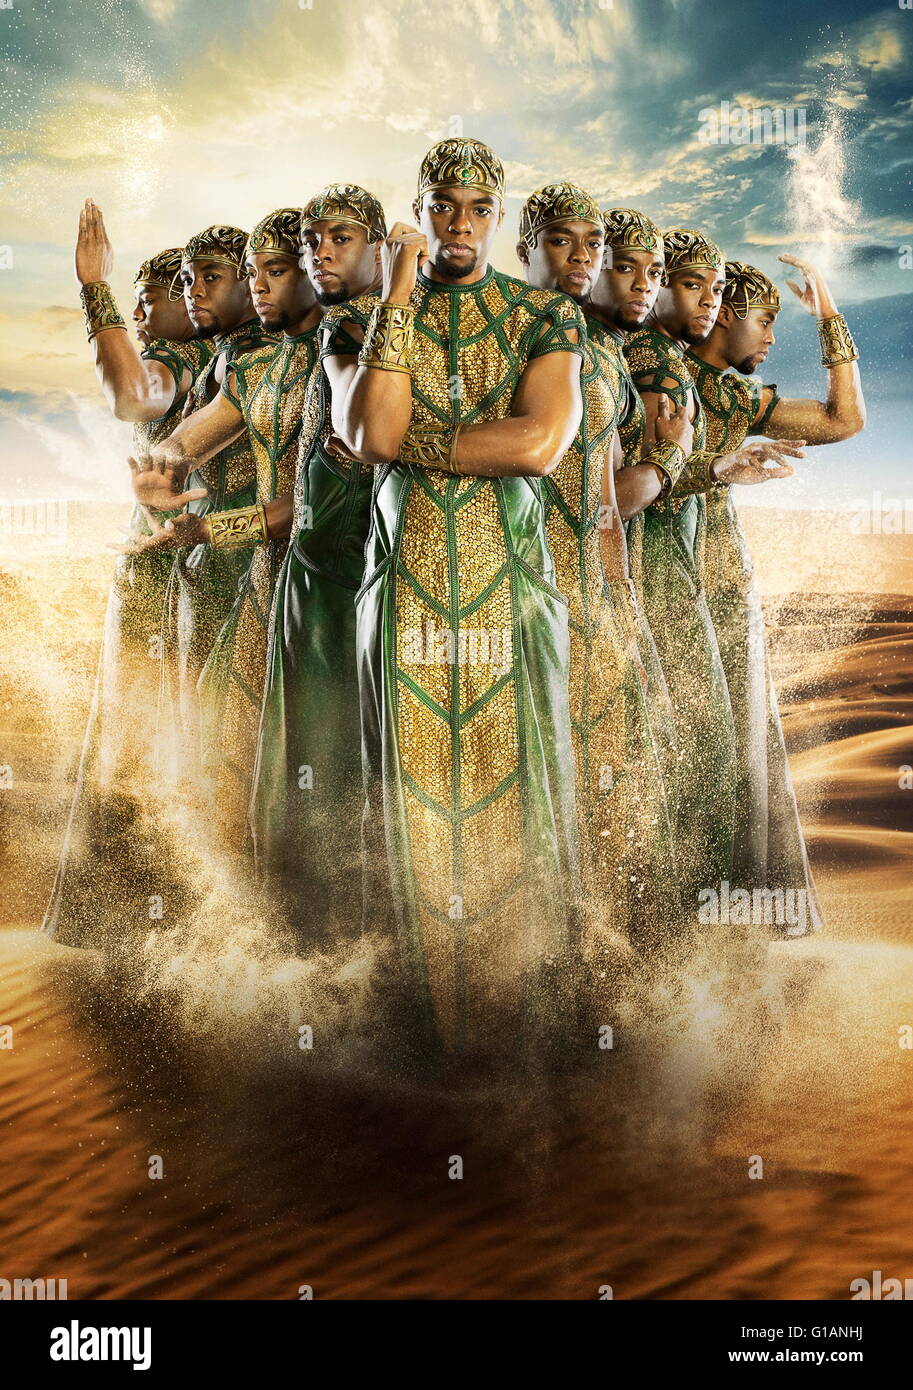 RELEASE DATE: February 26, 2016 TITLE: Gods of Egypt STUDIO: Fox Studios DIRECTOR: Alex Proyas PLOT: Mortal hero Bek teams with the god Horus in an alliance against Set, the merciless god of darkness, who has usurped Egypt's throne, plunging the once peaceful and prosperous empire into chaos and conflict PICTURED: Poster Art (Credit Image: c Fox Studios/Entertainment Pictures/) Stock Photo